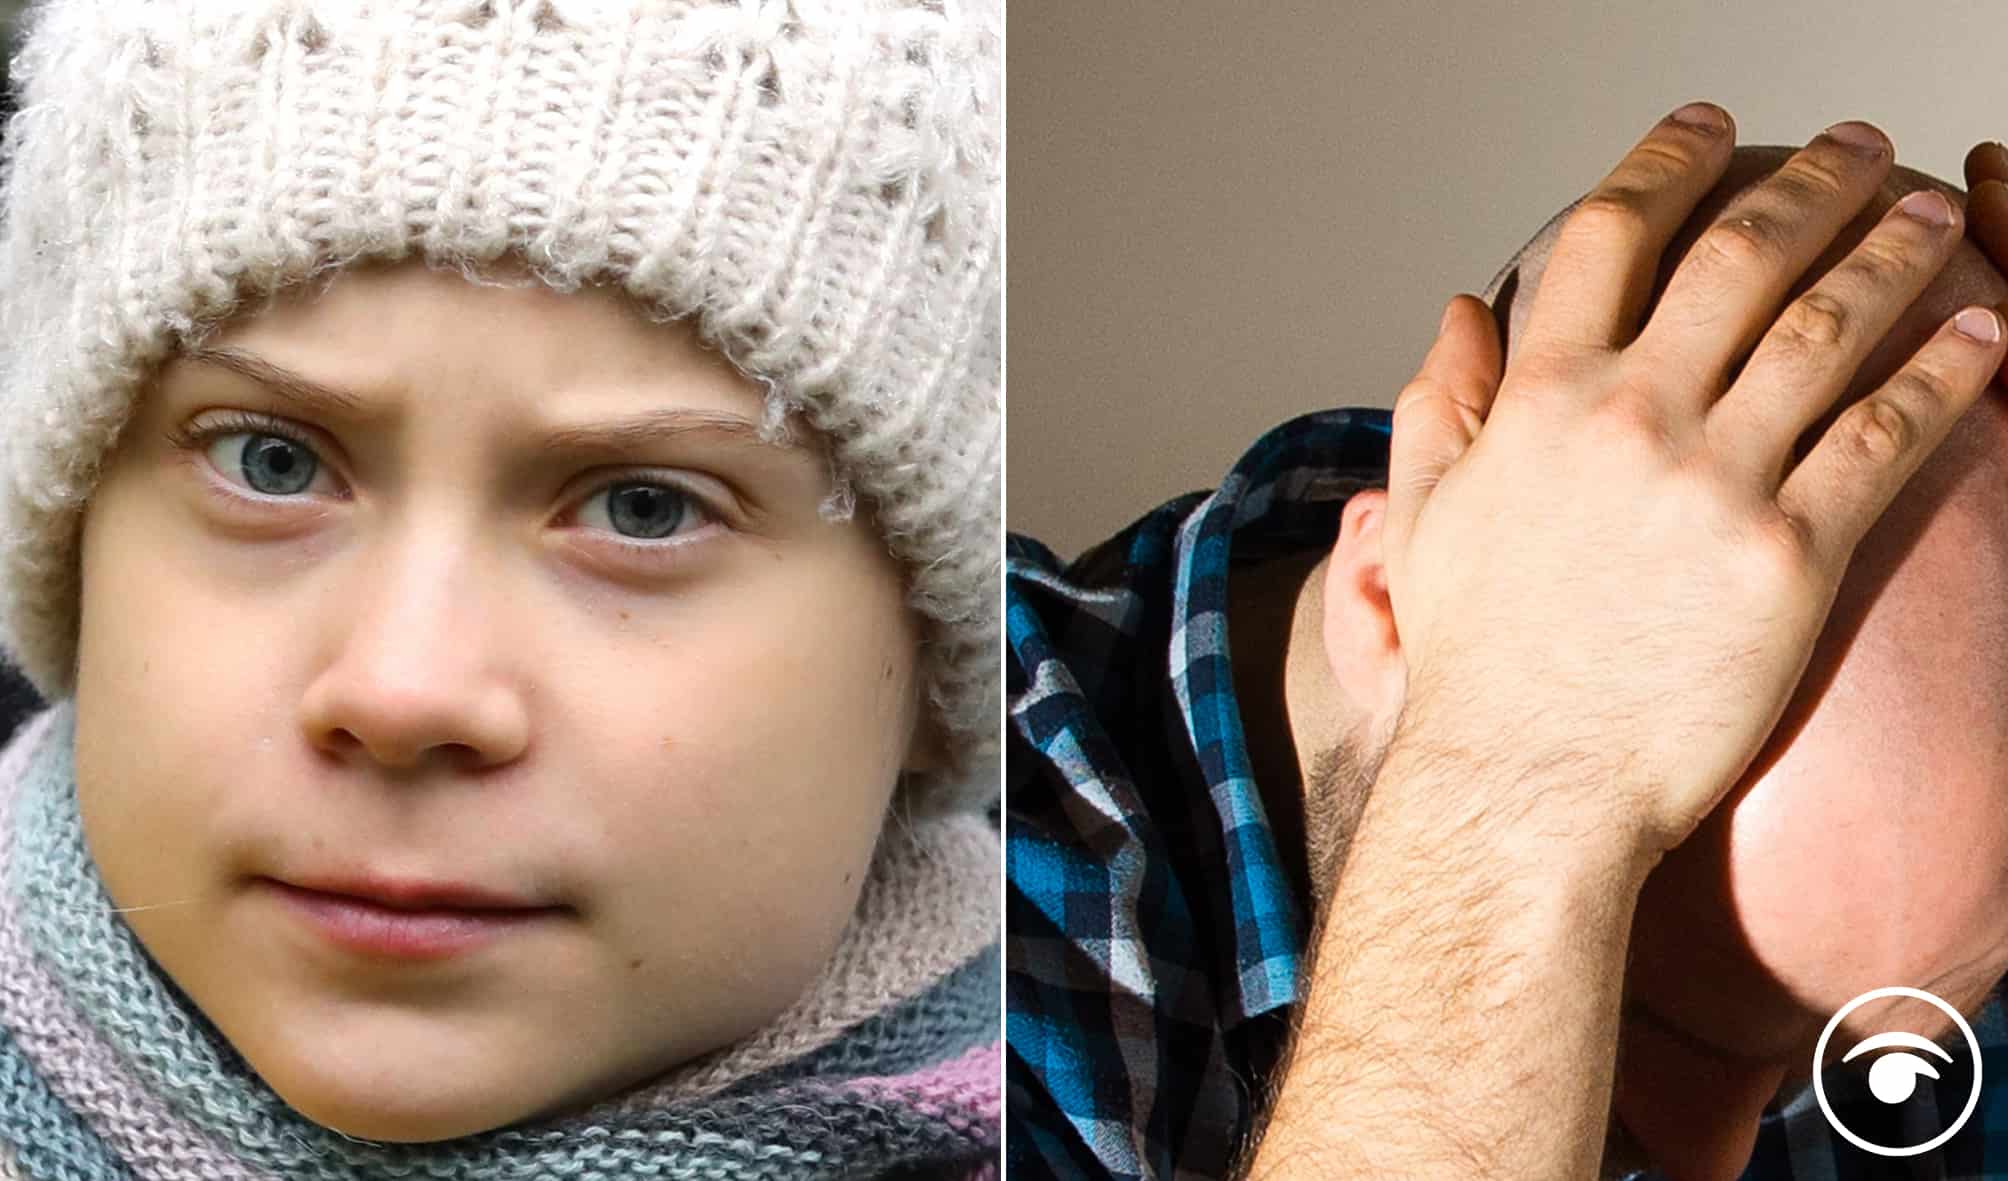 Reactions as Greta Thunberg shows killer sense of humour about ‘shrinking penis’ pollution concerns